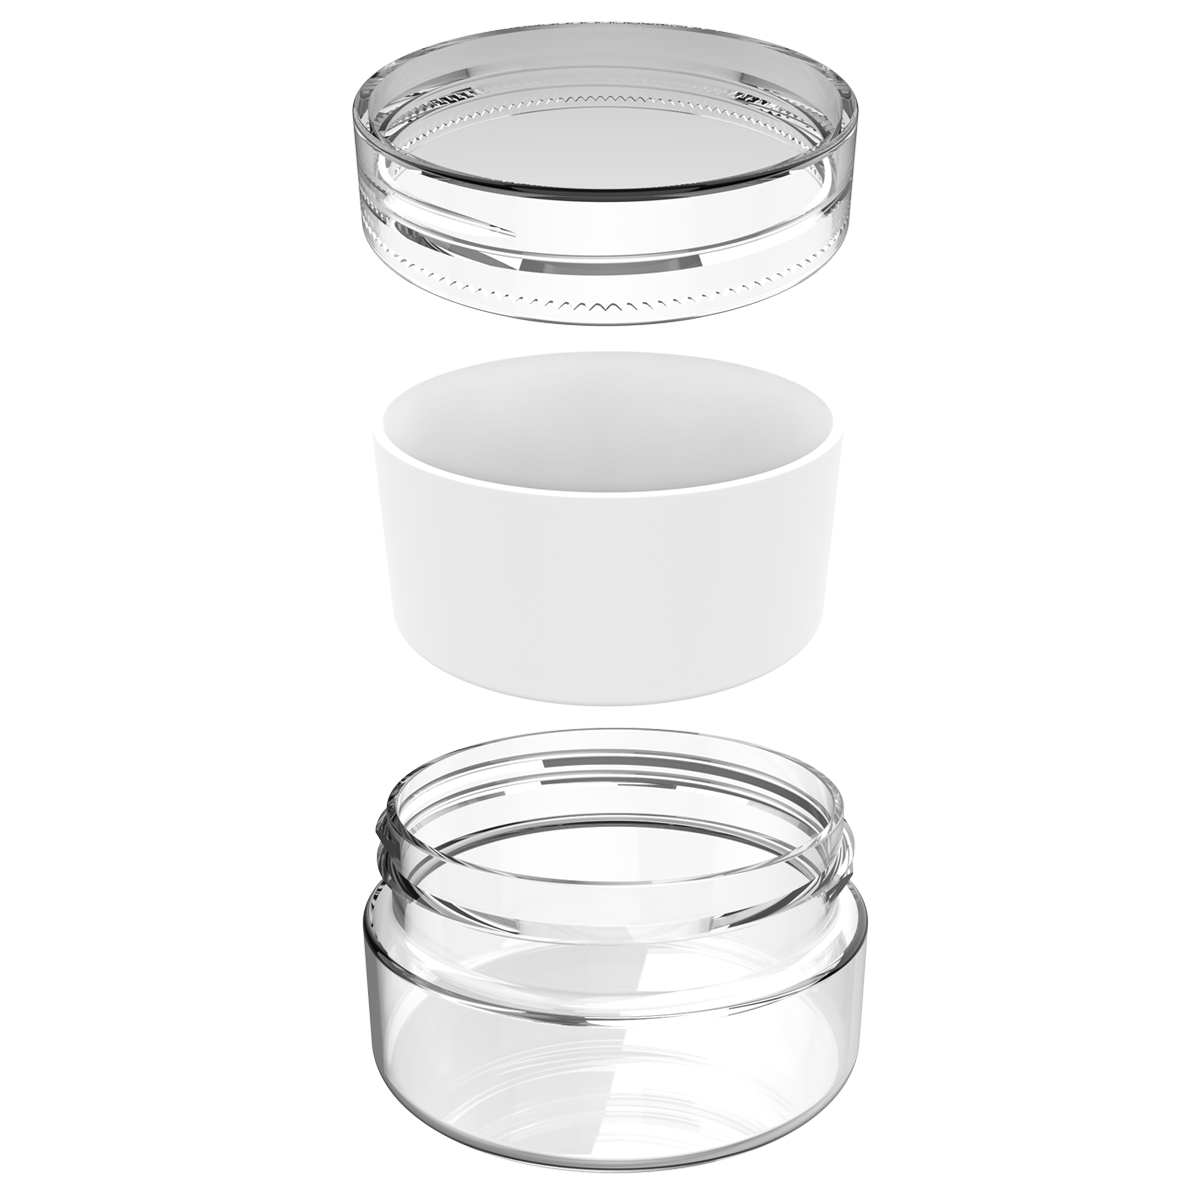 3Pcs/Set 5ml/3ml/2ml Jar Storage Box Silicone Container Mix Colors Nonstick  Concentrate Containers Jars Silicone Case For Oil Wax